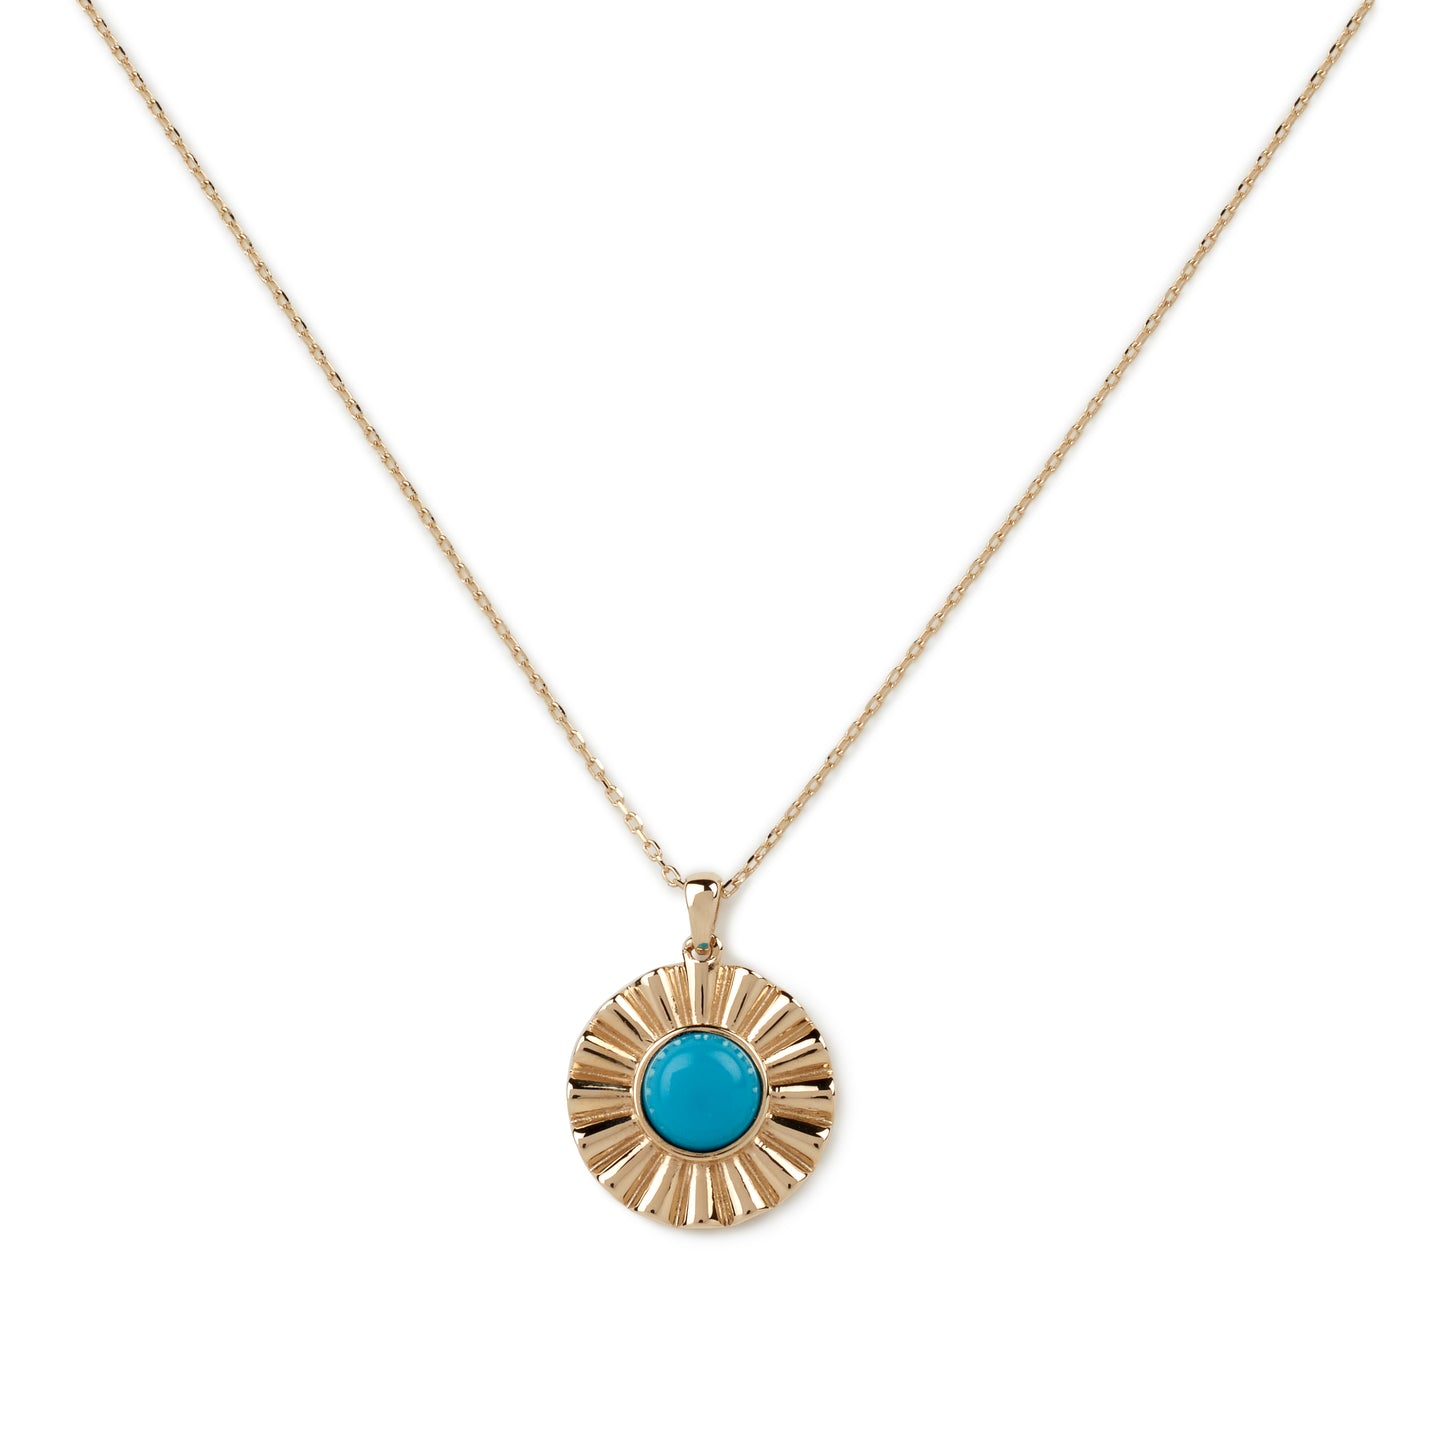 14k gold necklace, gold necklace women, solid gold necklace, tuquoise jewelry, gold sun necklace, 14k gold sun pendant, real gold sun charm, turquoise necklace, vintage gold pendant, turqoise gemstone, sun rays necklace, starburst necklace, sunshine necklace, 